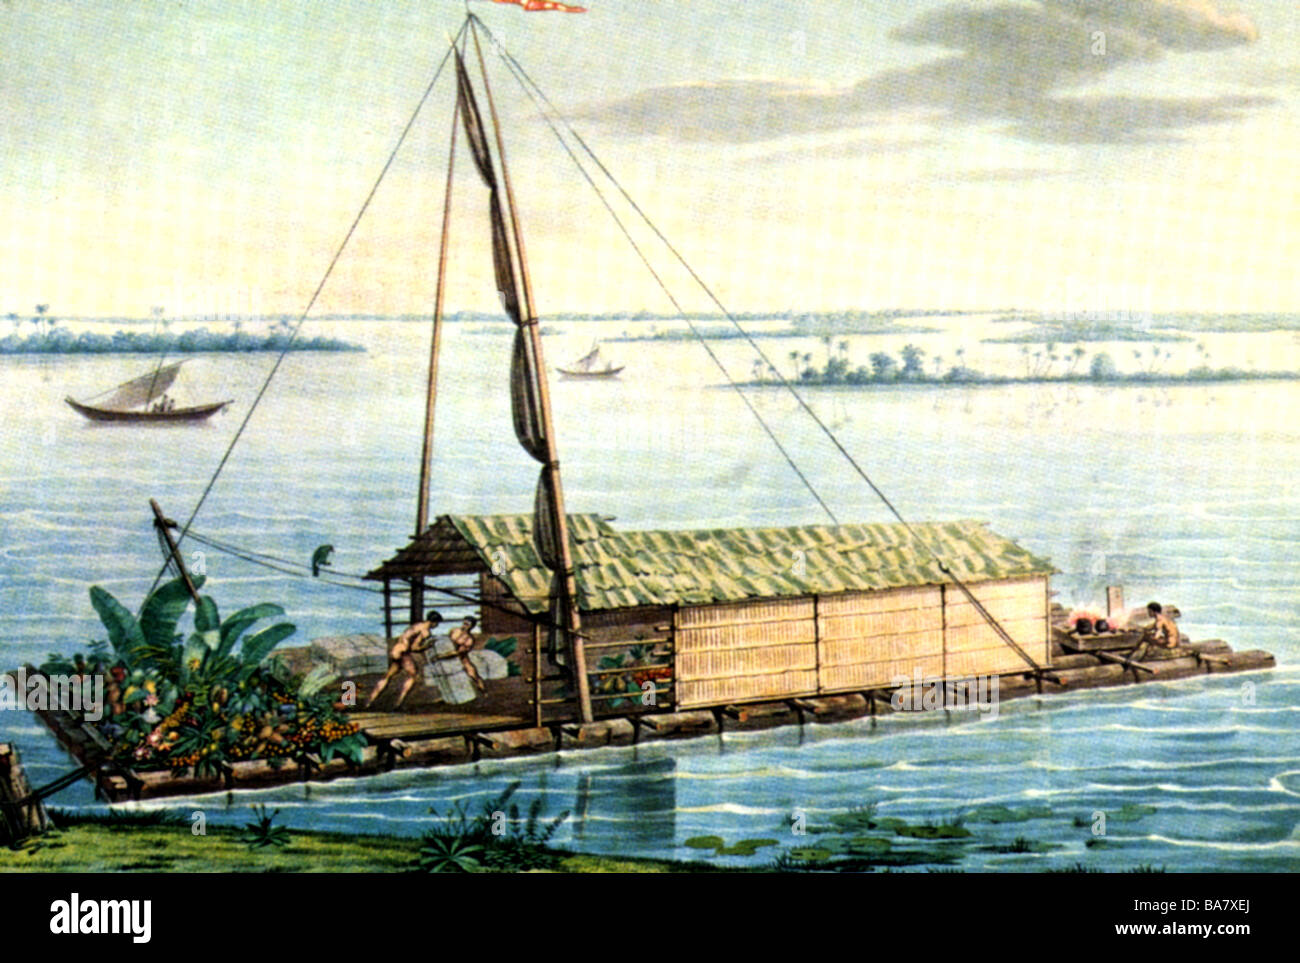 Humboldt, Alexander von, 14.9.1769 - 6.5.1859, German scientist (naturalist and geographer), expedition to South America, raft on Guayaquil River, Ecuador, 1799/1804, colour print after drawing by himself, Stock Photo